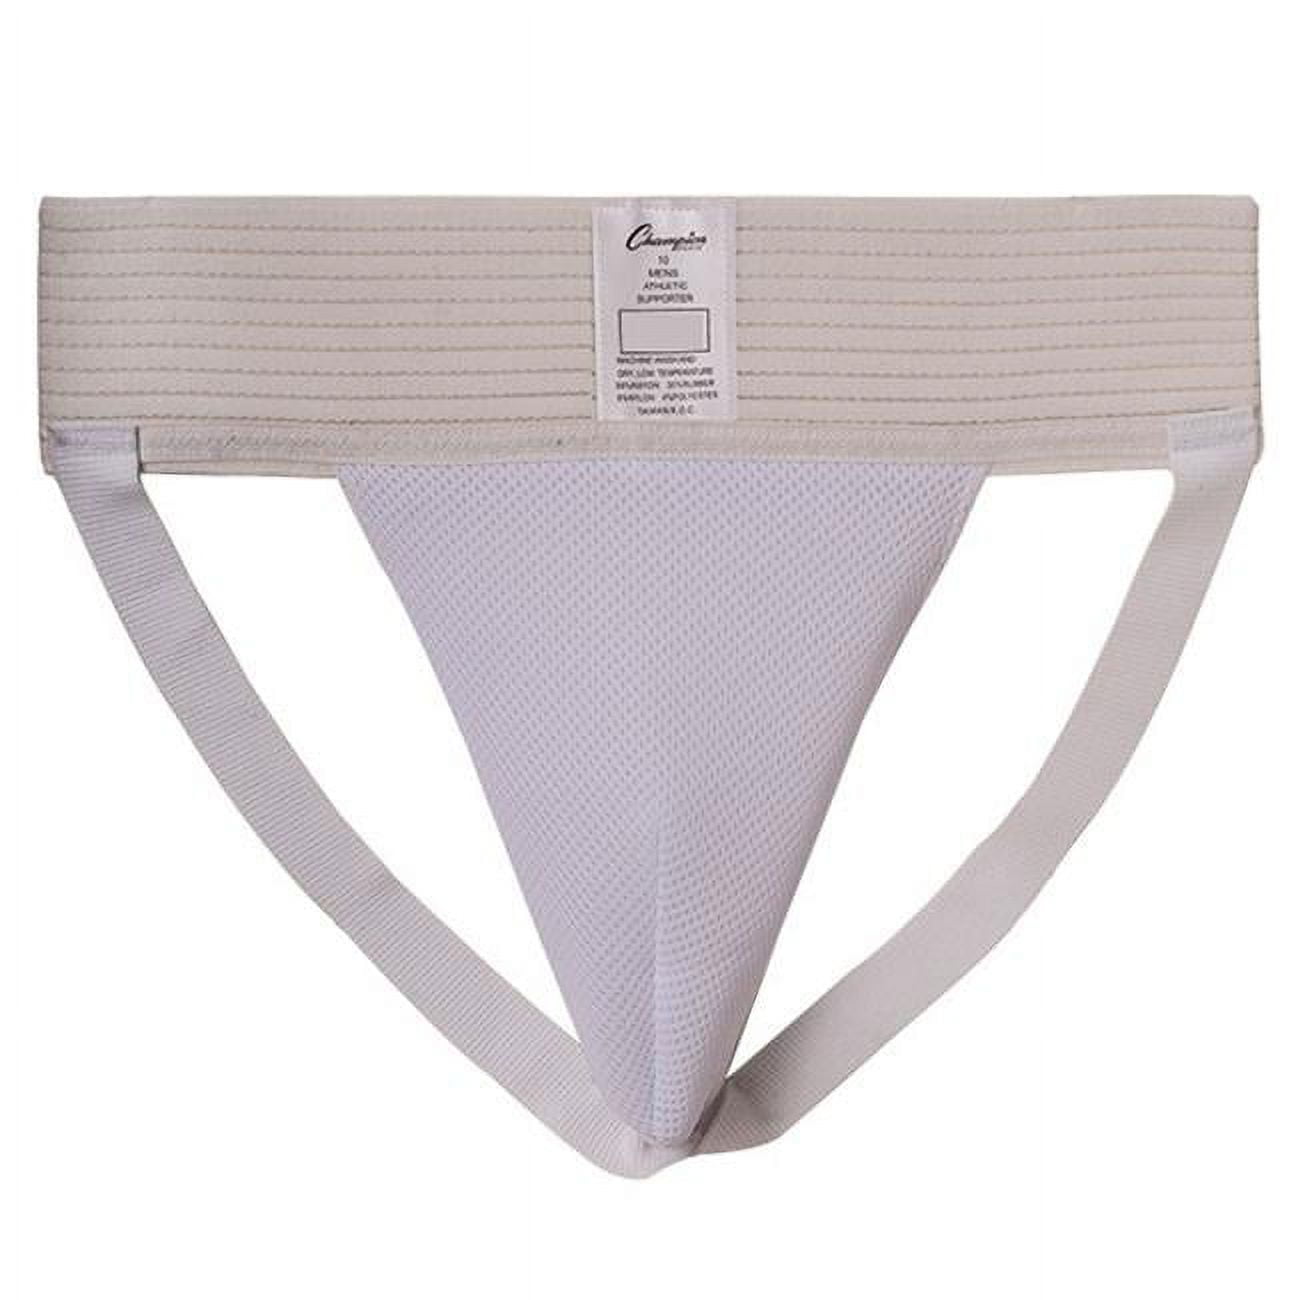 Picture of Champion Sports 10MD Mens Athletic Supporter, White - Medium